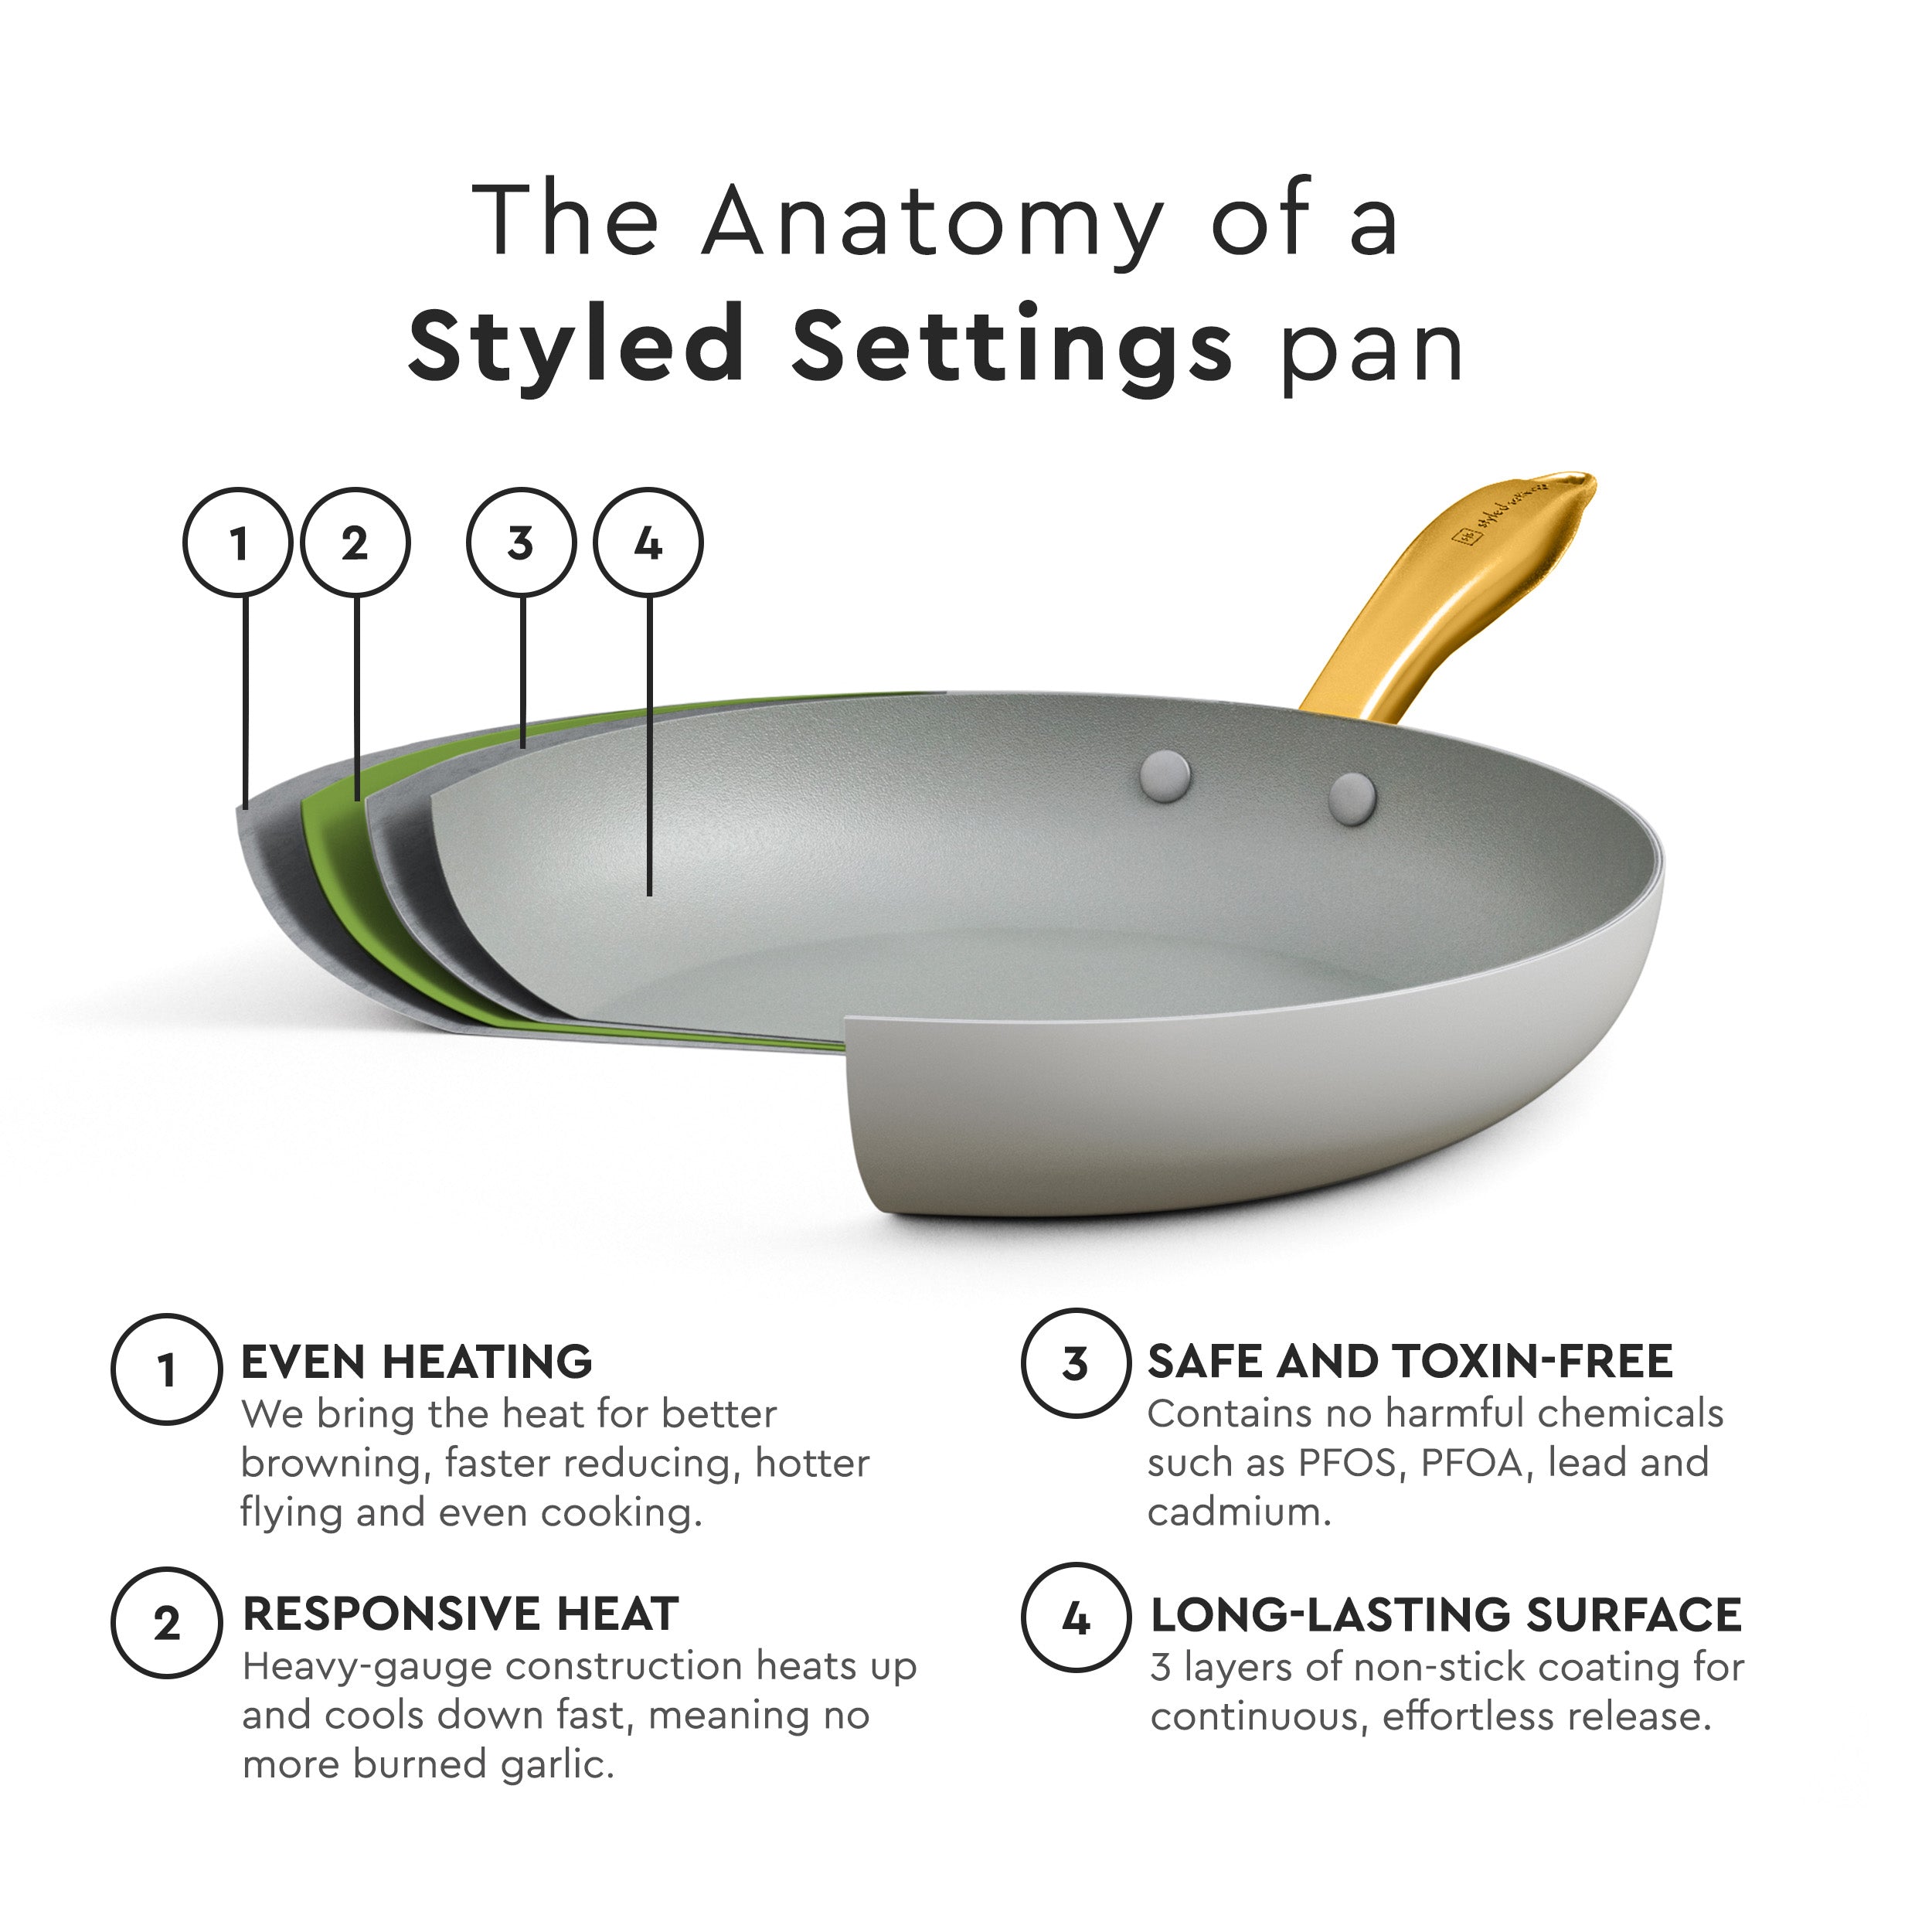 Are nonstick pans safe? - Reviewed